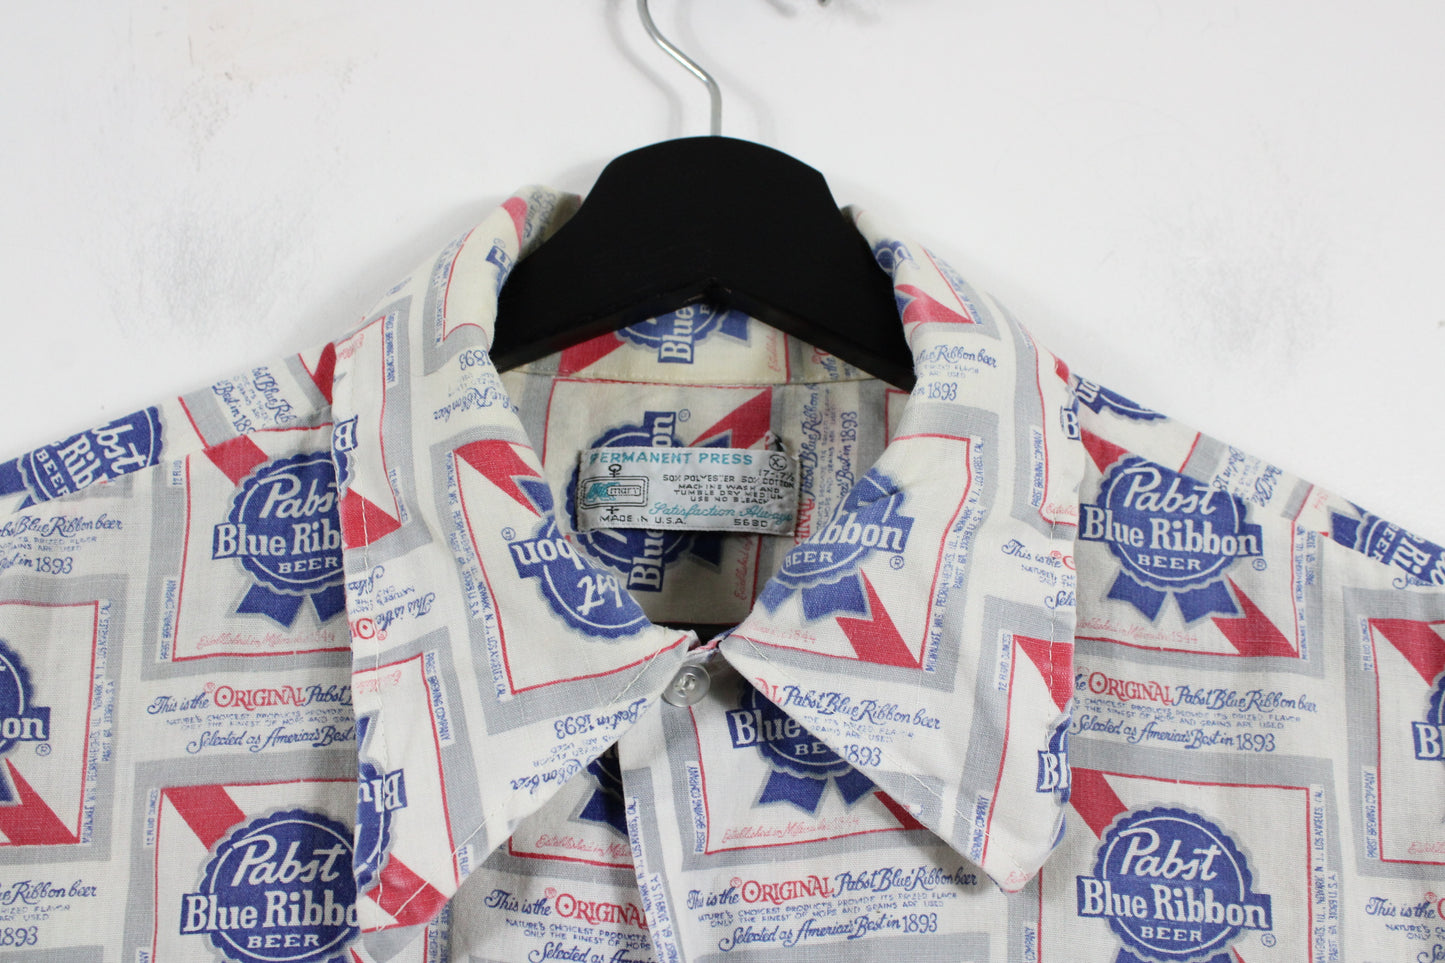 Pabst Blue Ribbon Beer Button-Up Shirt